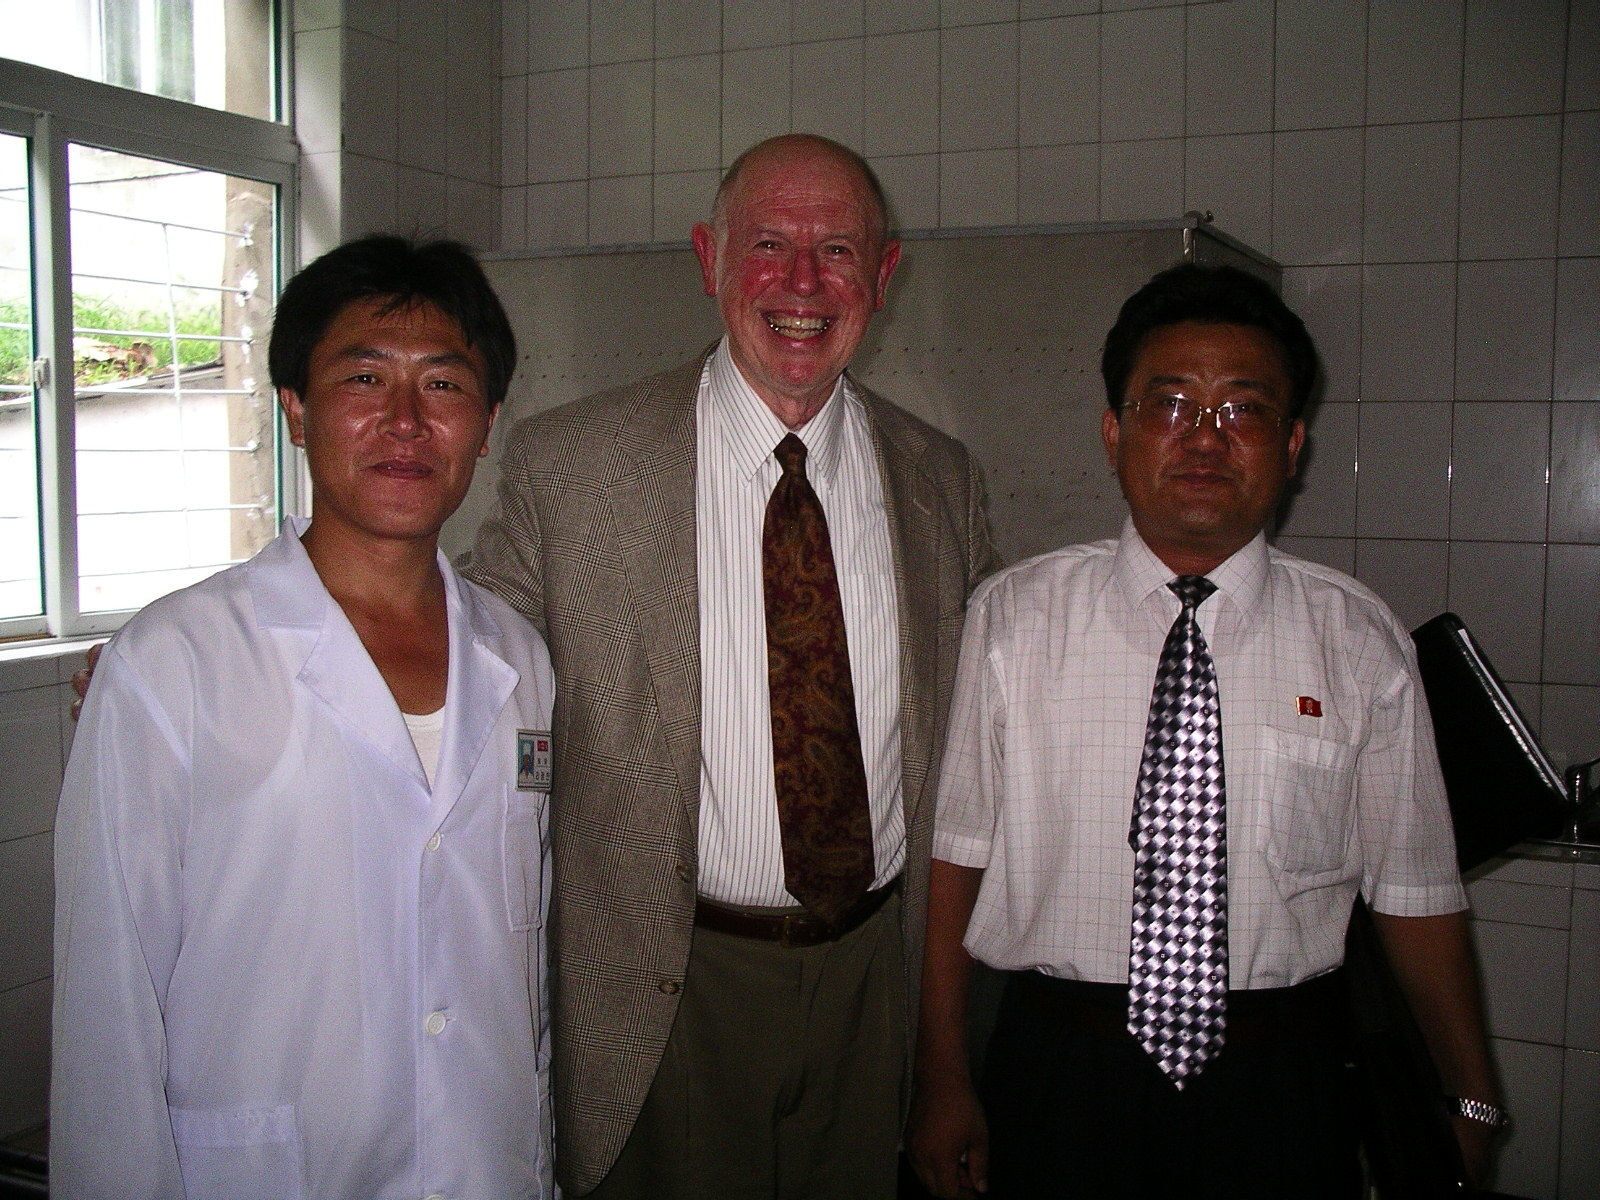 Three men posing for a photo, one of them doctor in white gown